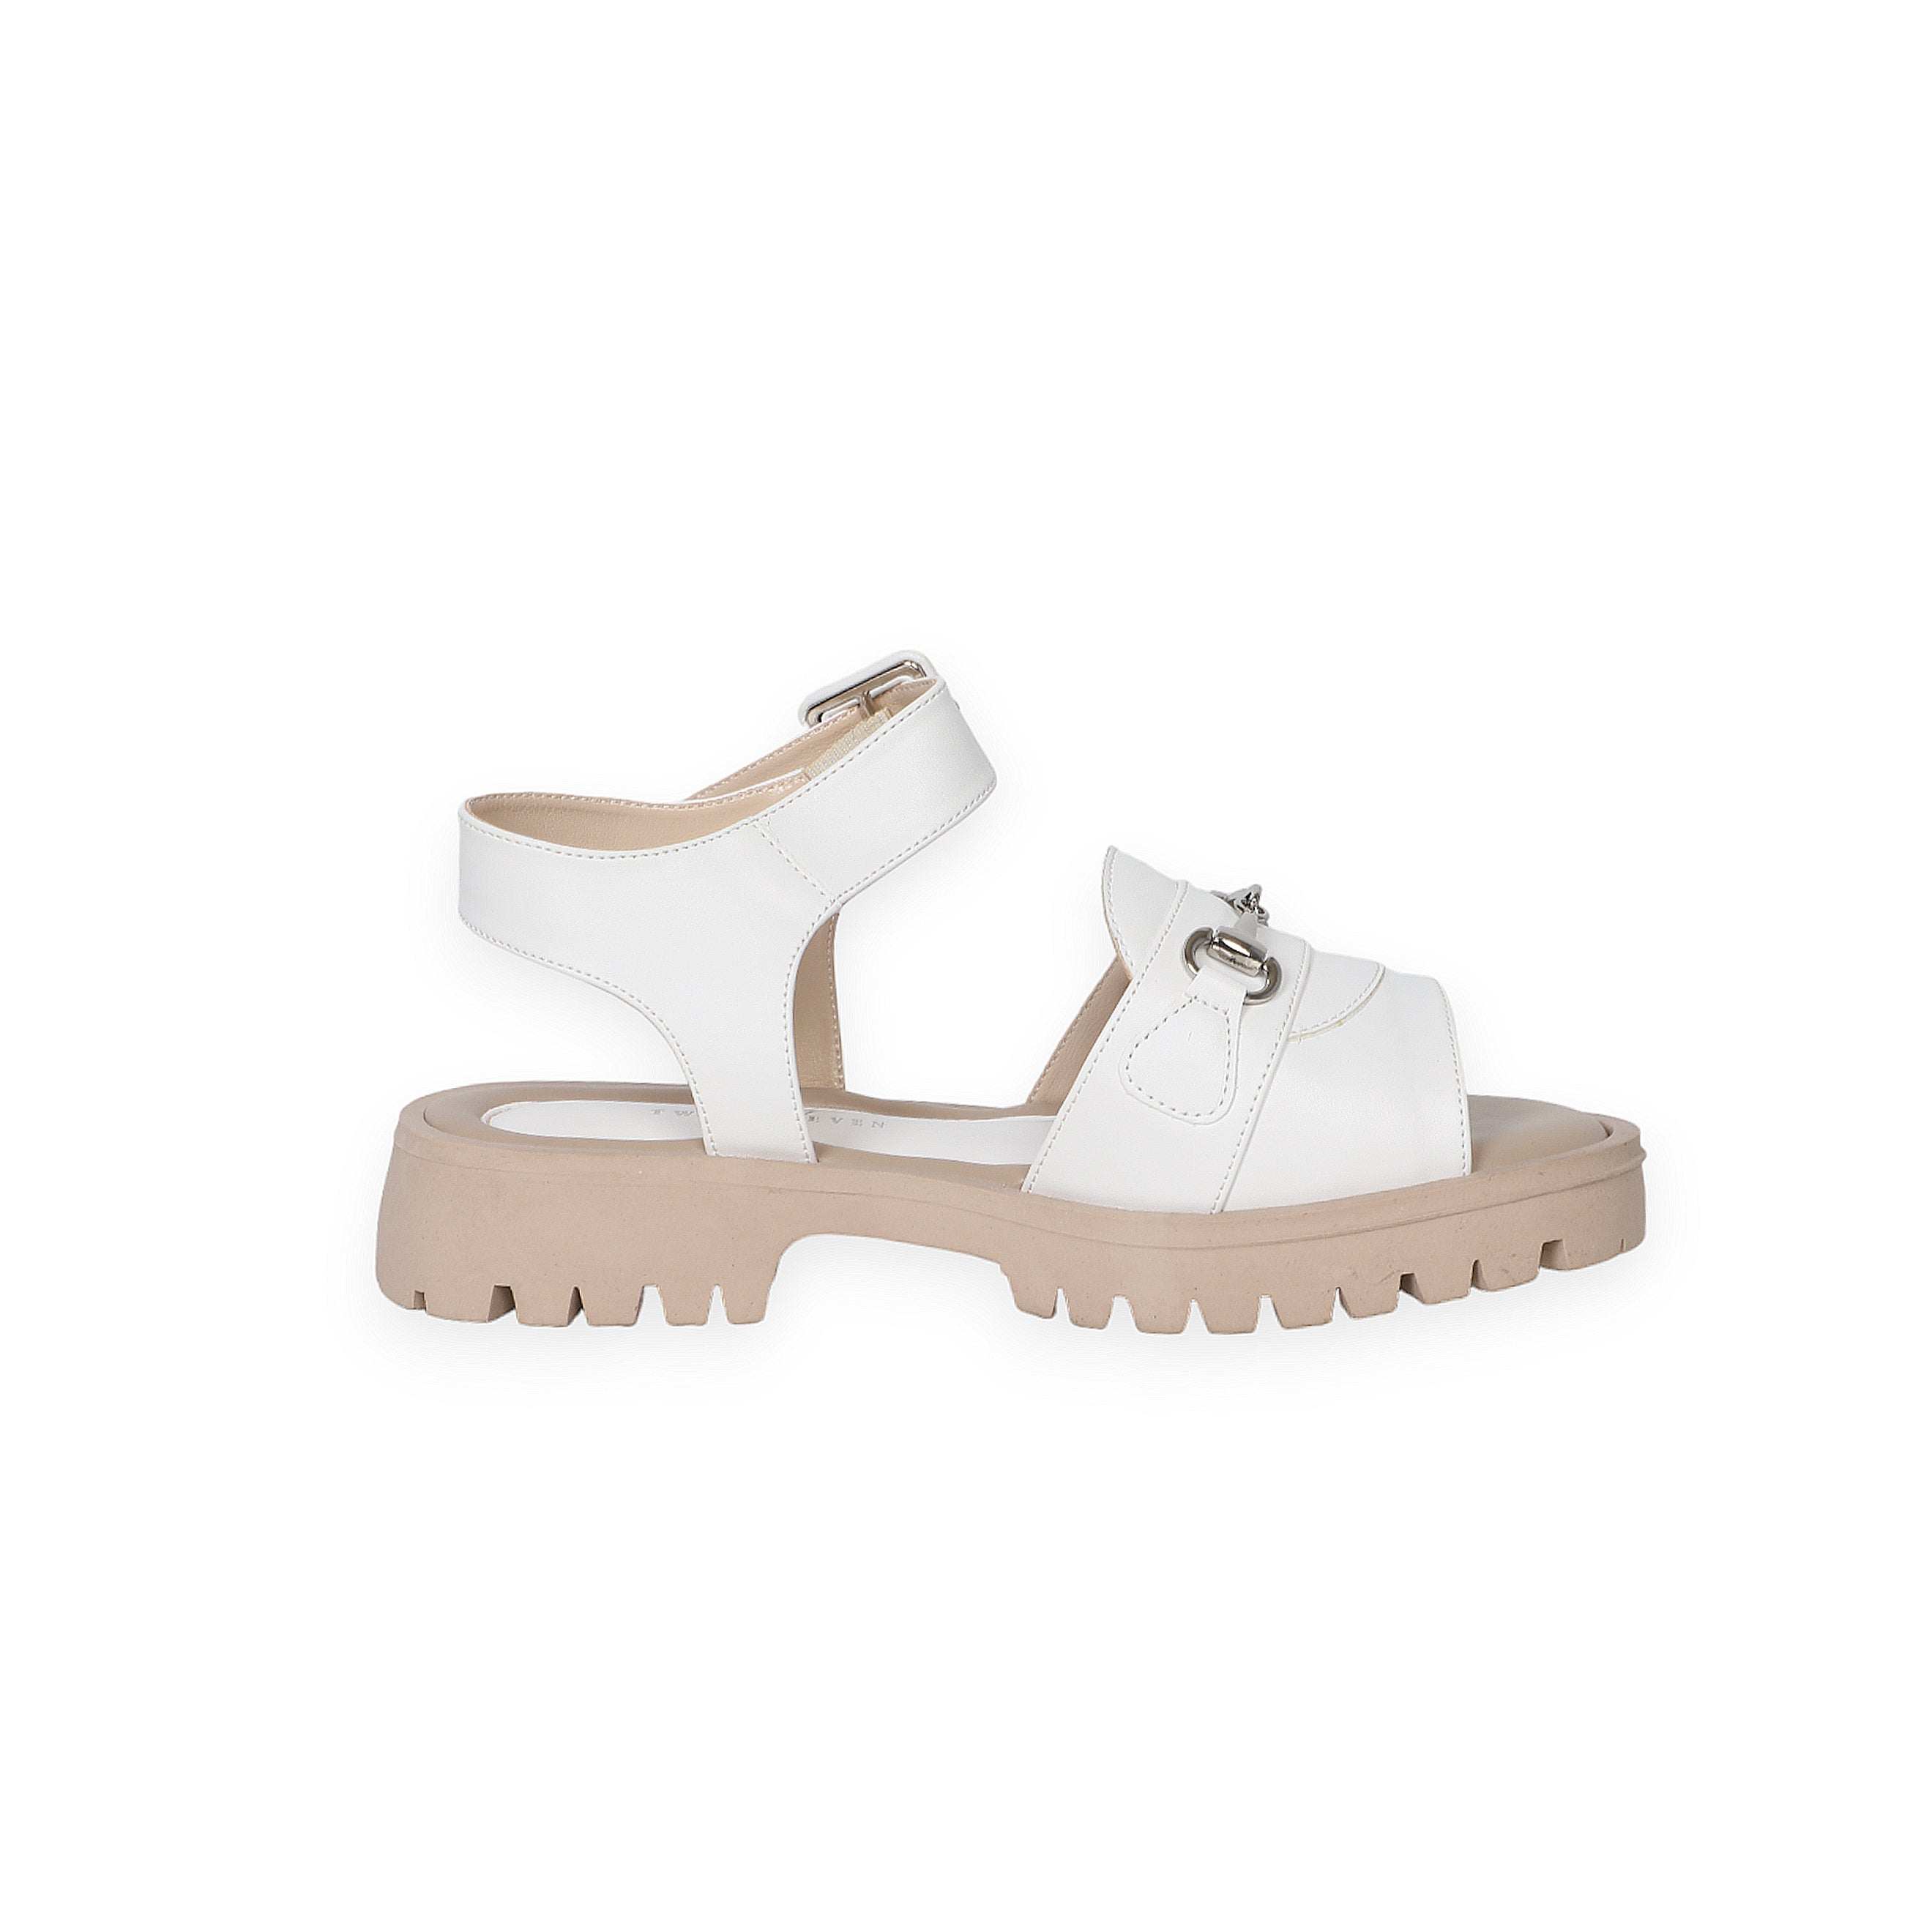 White Women Sandals With Sole Ankle Strap